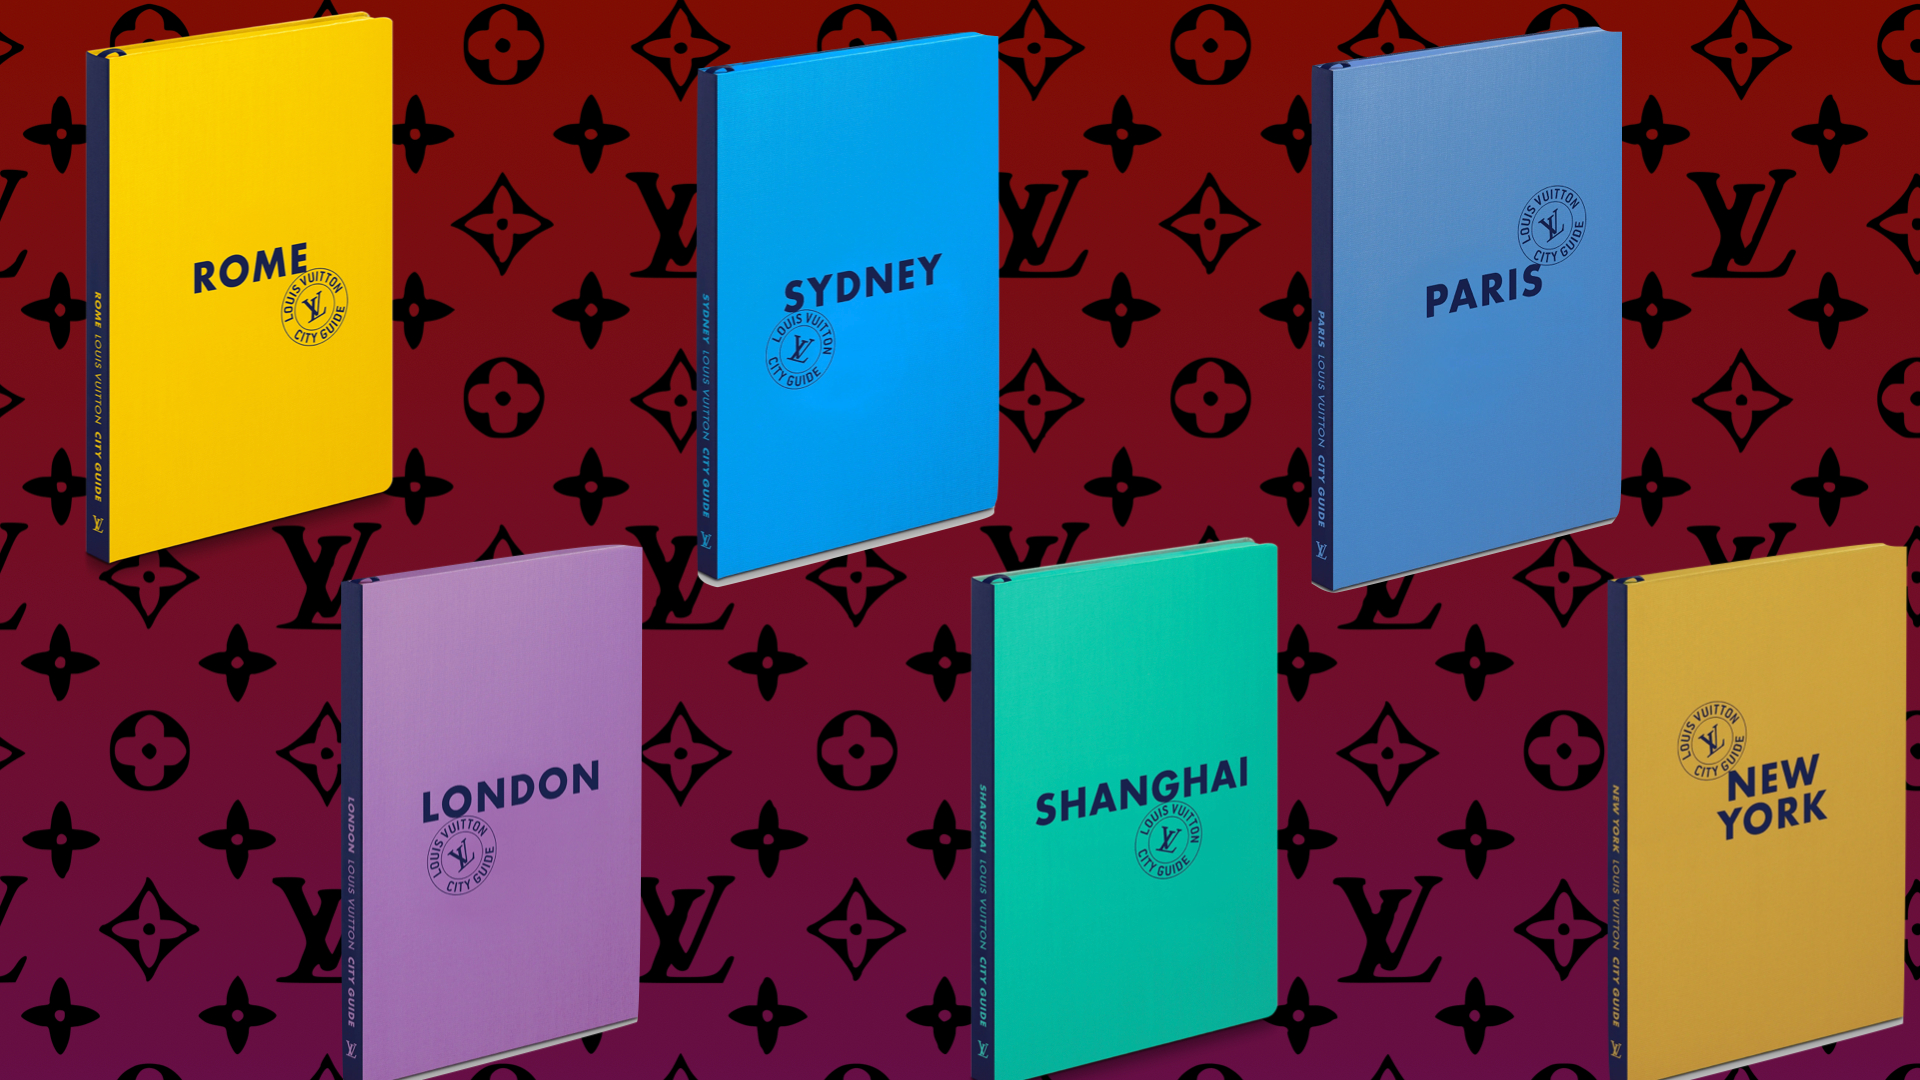 Louis Vuitton Dropped Their 2021 City Guide Books Just In Time For